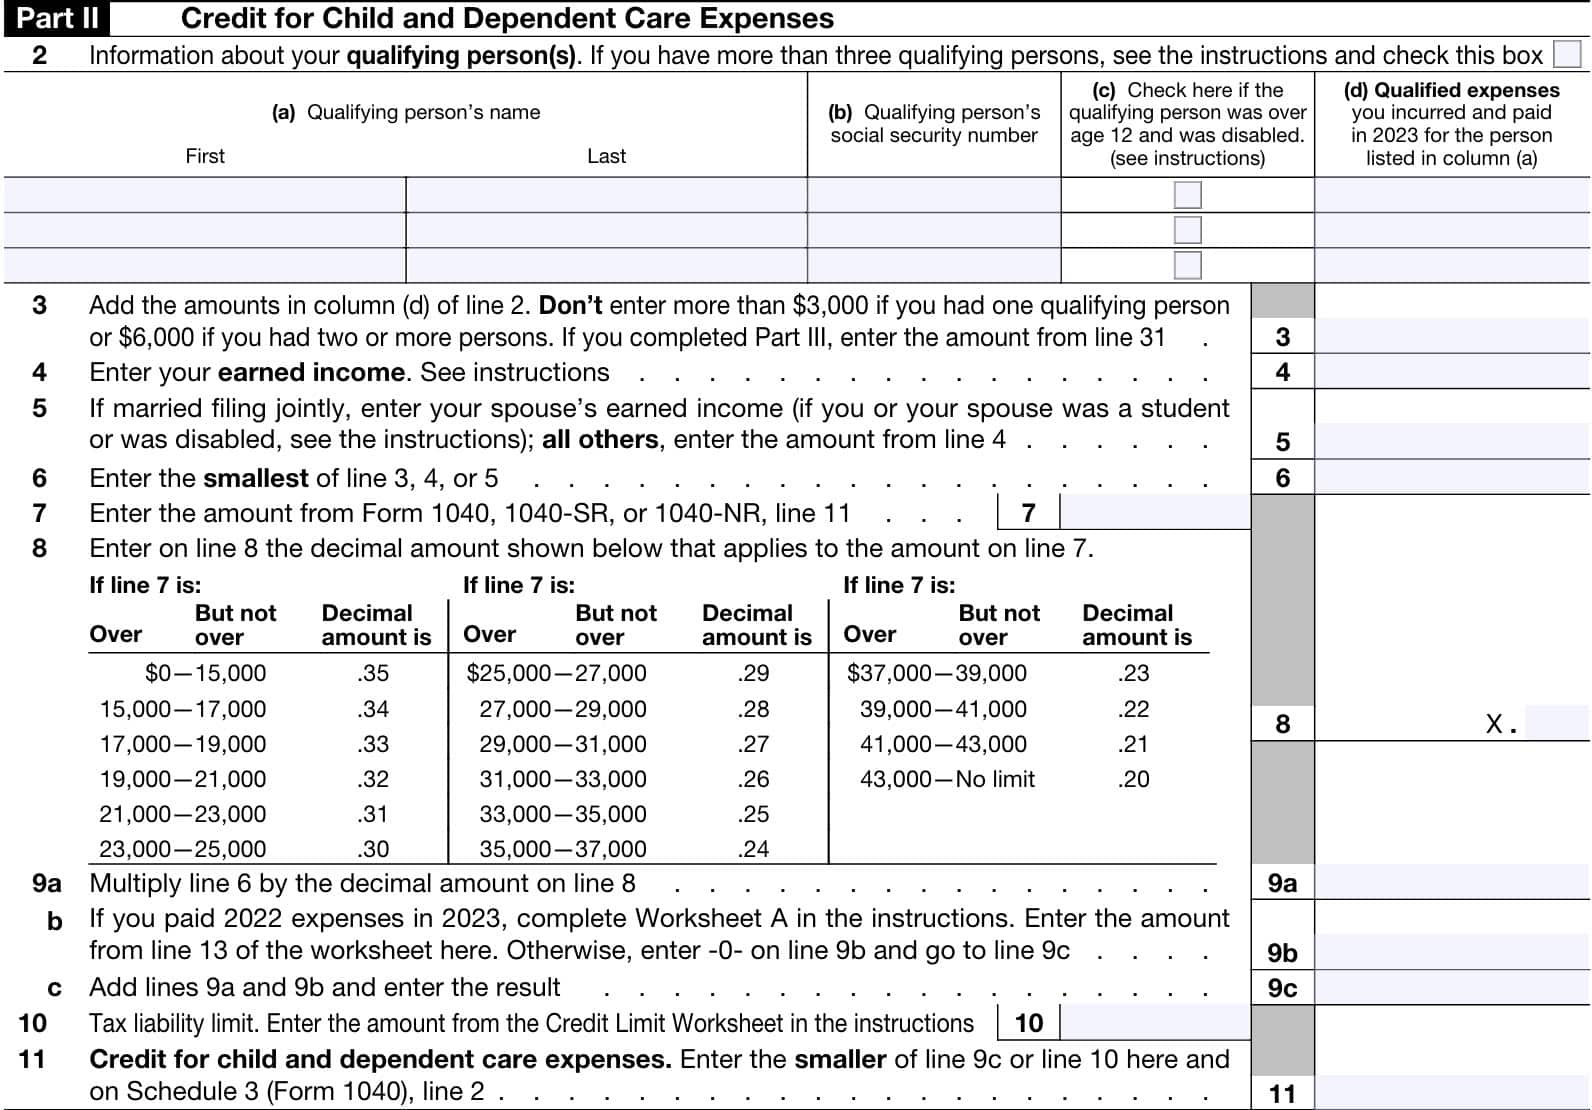 irs form 2441, Part II: Credit for child and dependent care expenses